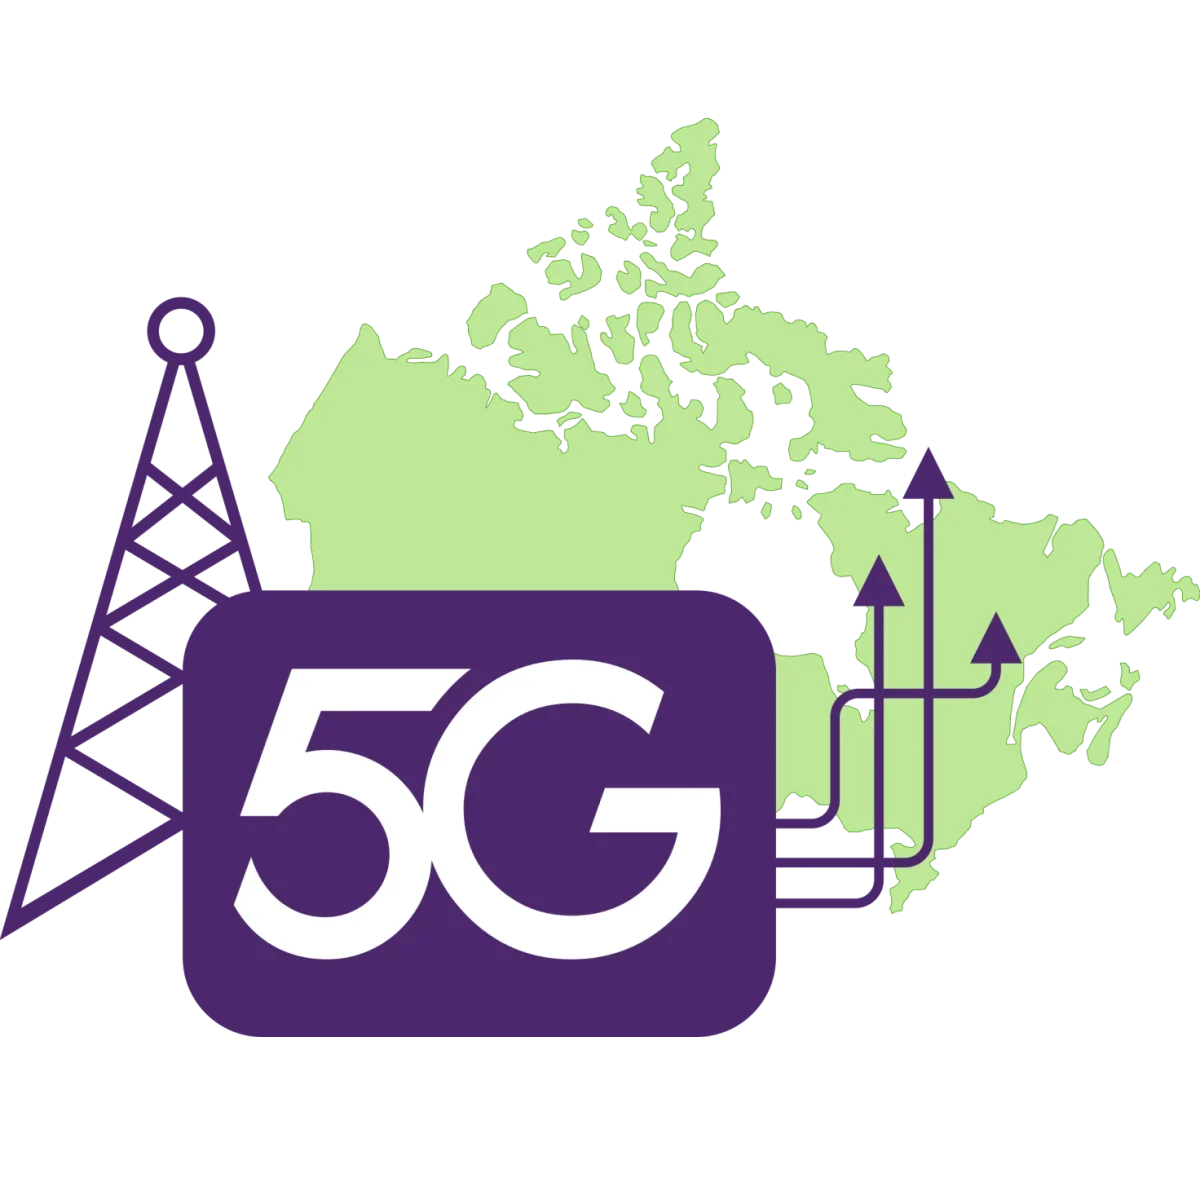 A map of Canada with a 5G logo superimposed on it